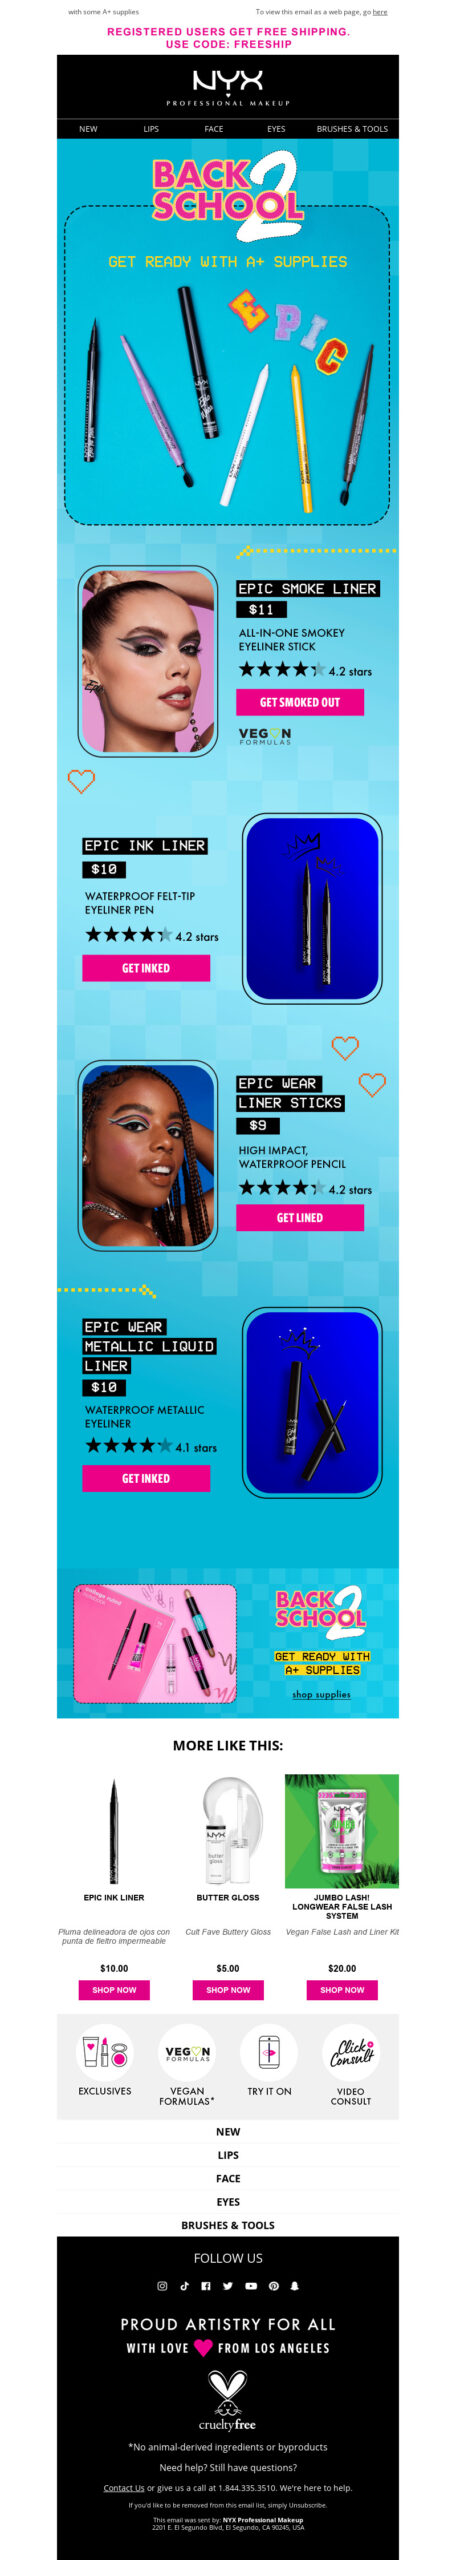 NYX back to school campaign